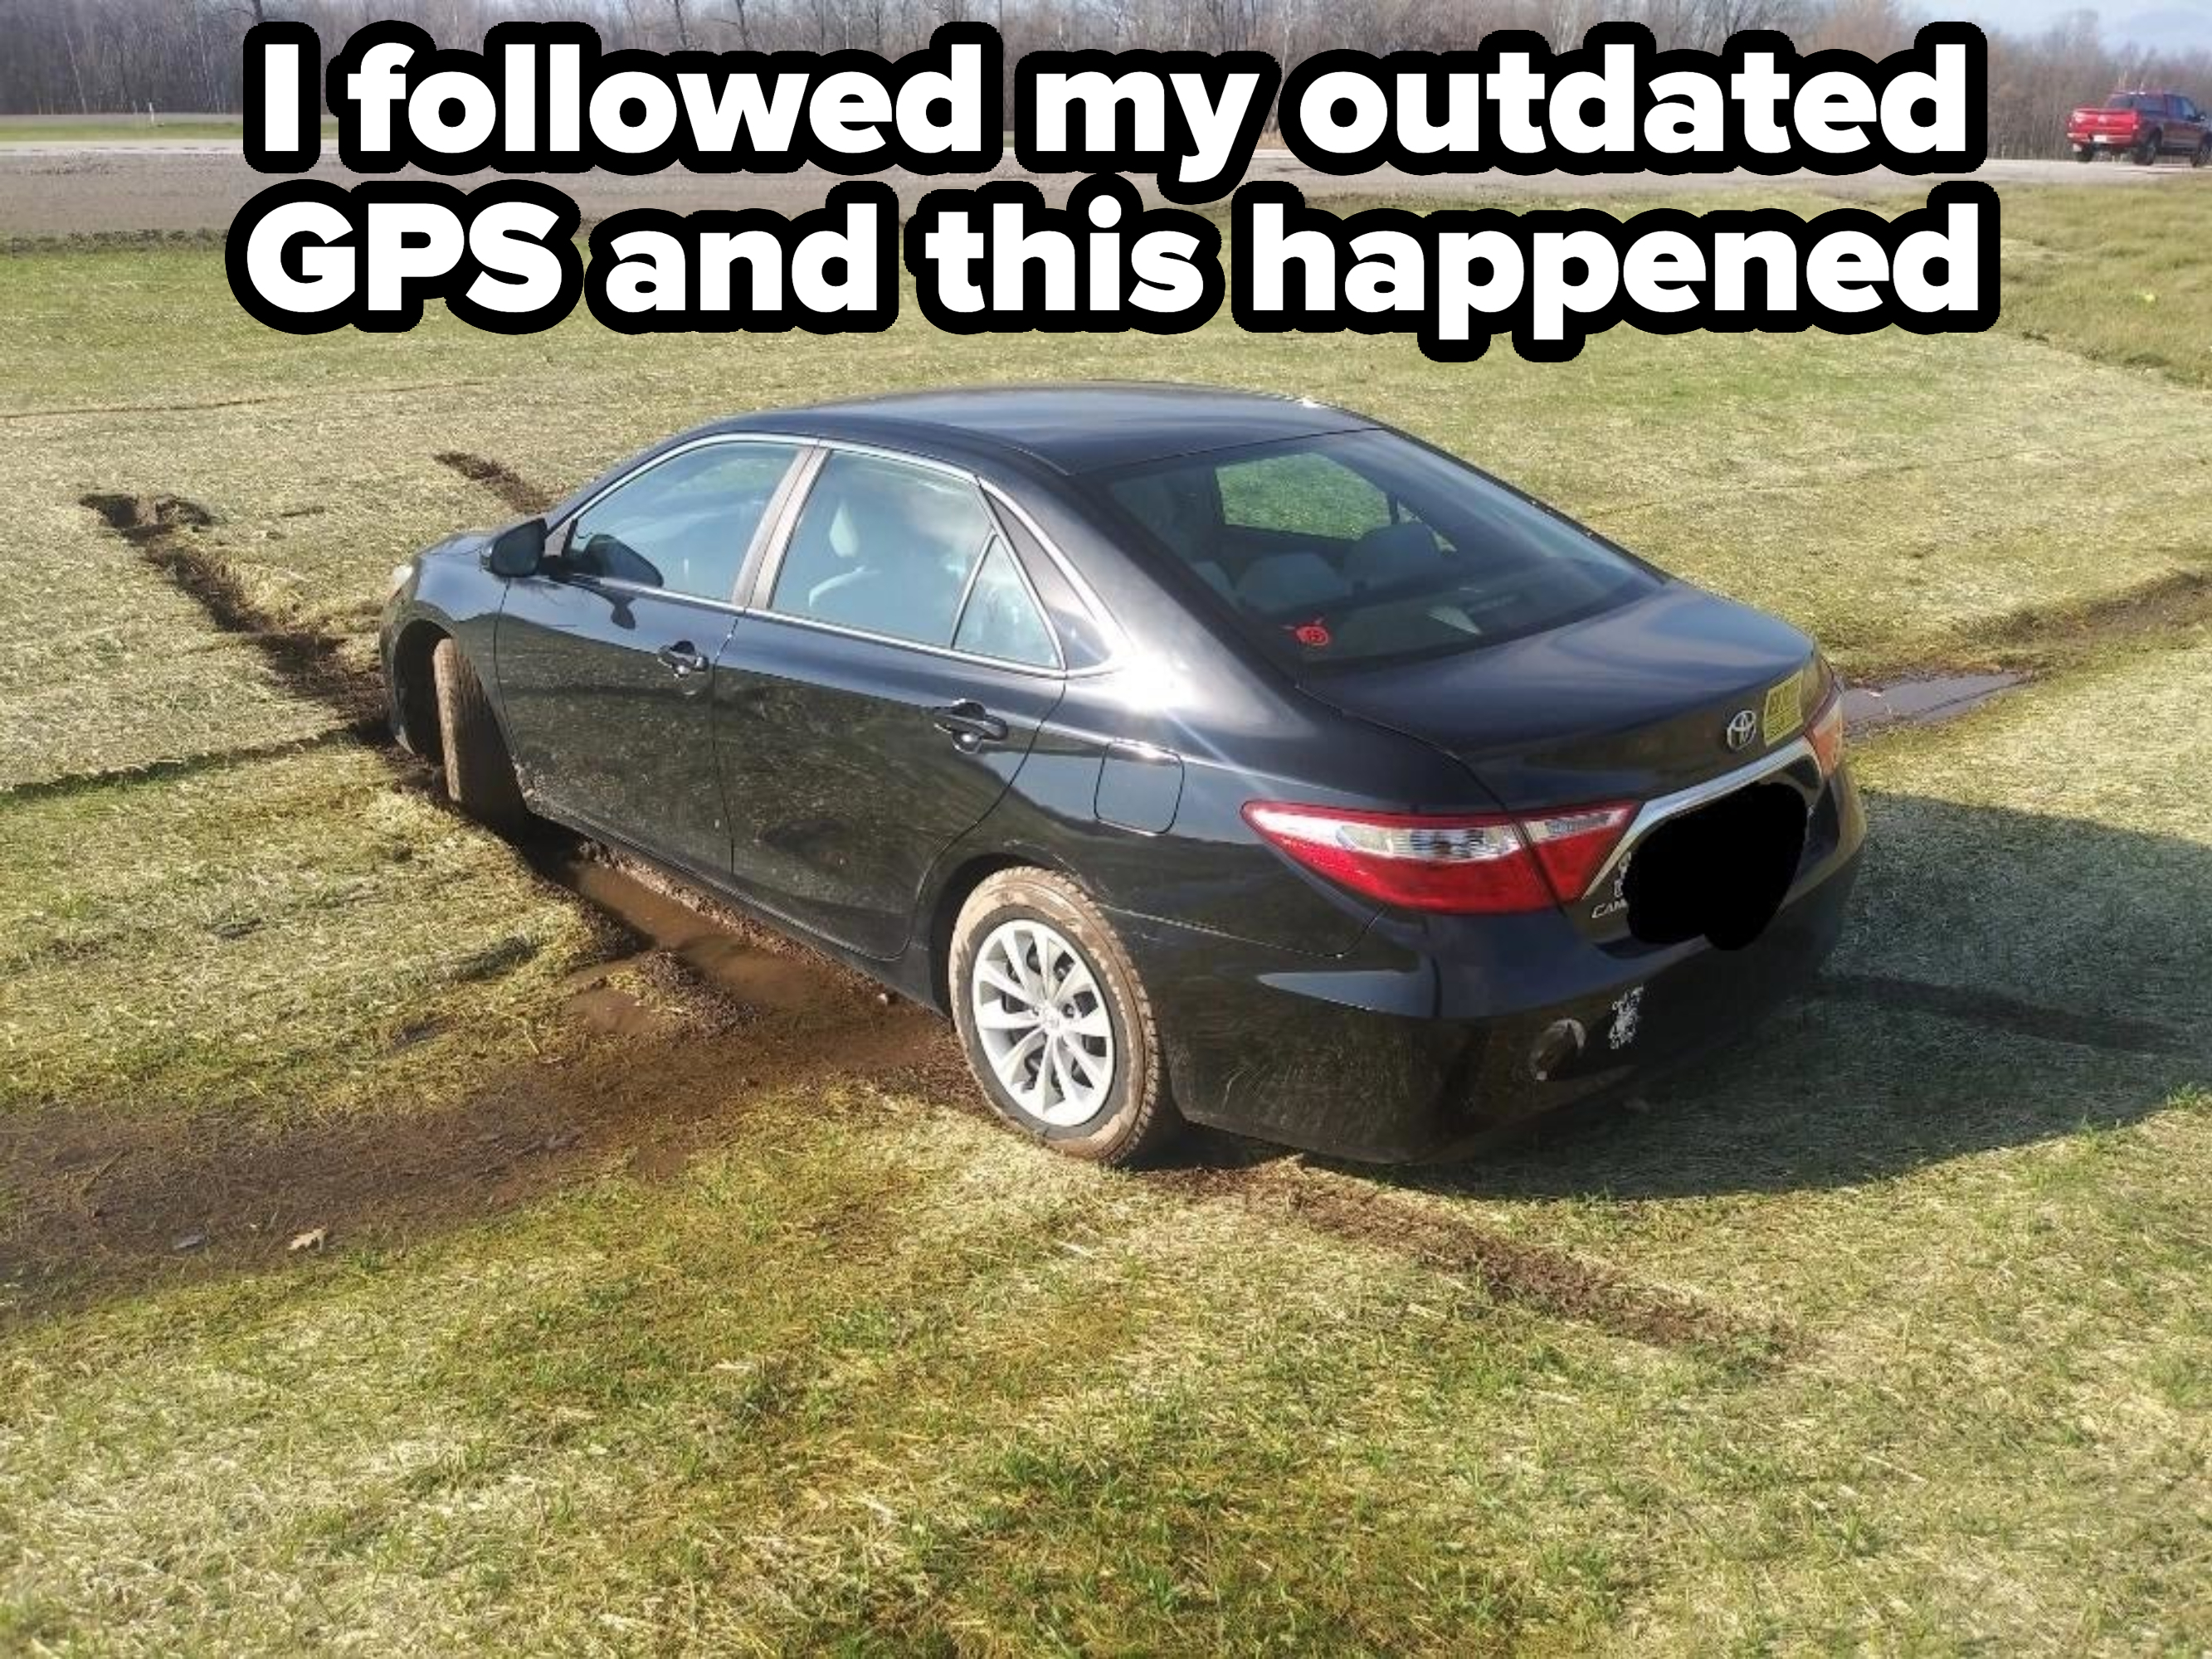 A car stuck in the grass, with caption, &quot;I followed my outdated GPS and this happened&quot;